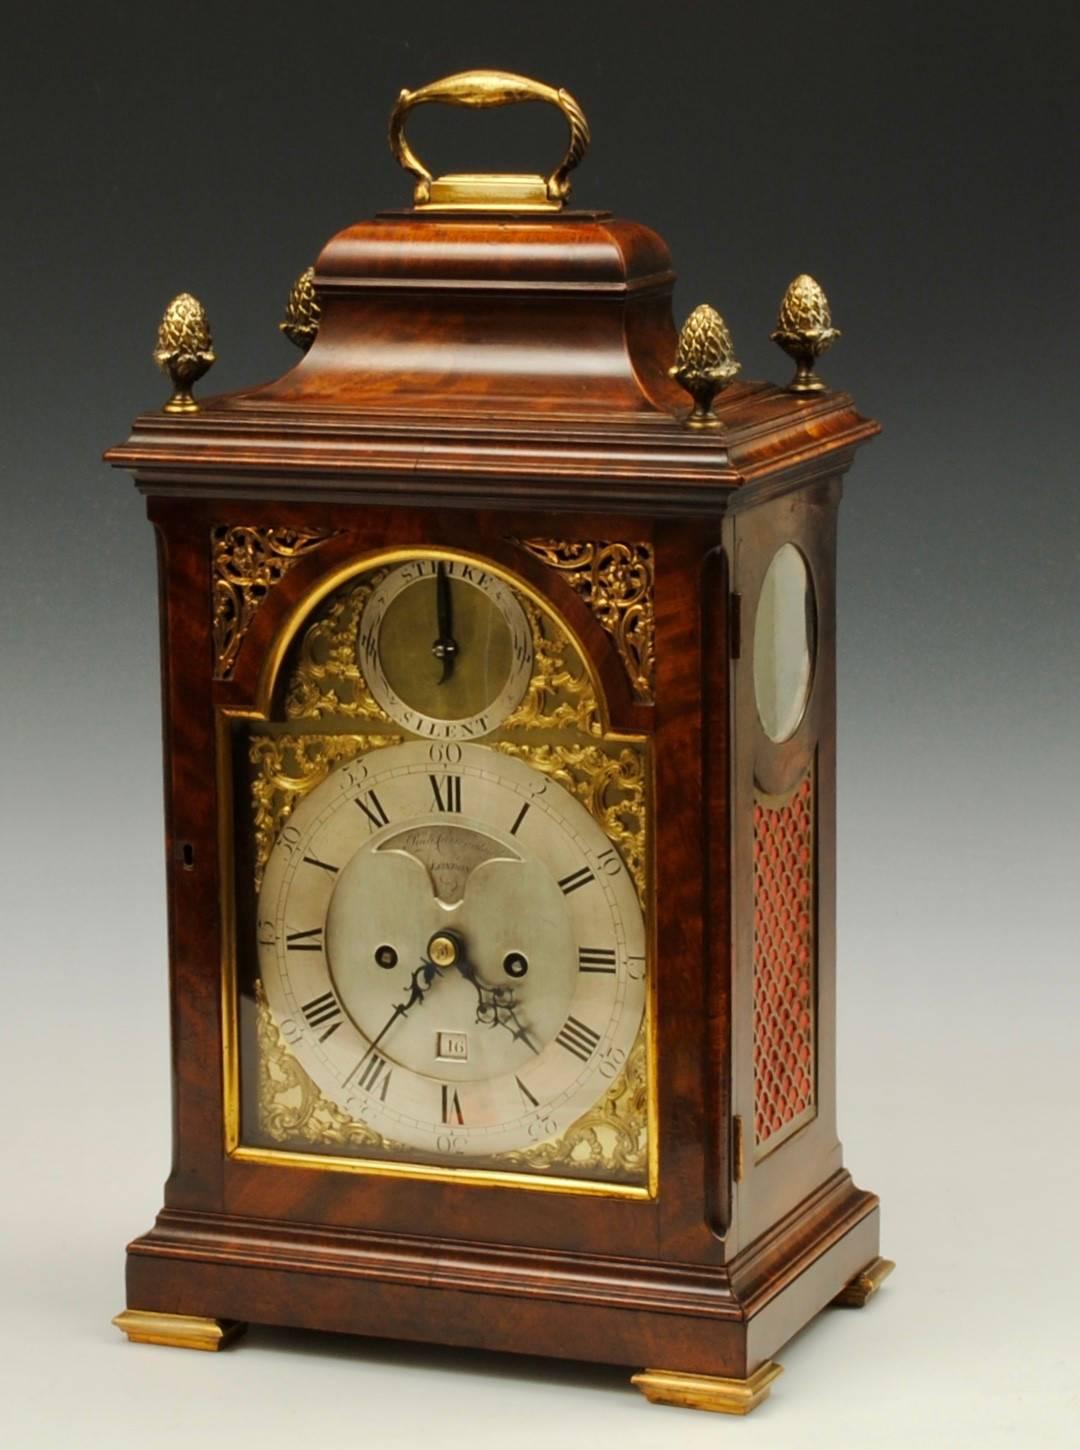 A George III period bell top mahogany cased eight day bracket clock of superb colour and pagination, the eight day twin train movement with pull repeat now converted to anchor escapement has a finely engraved back plate. Signed on the dial Richard